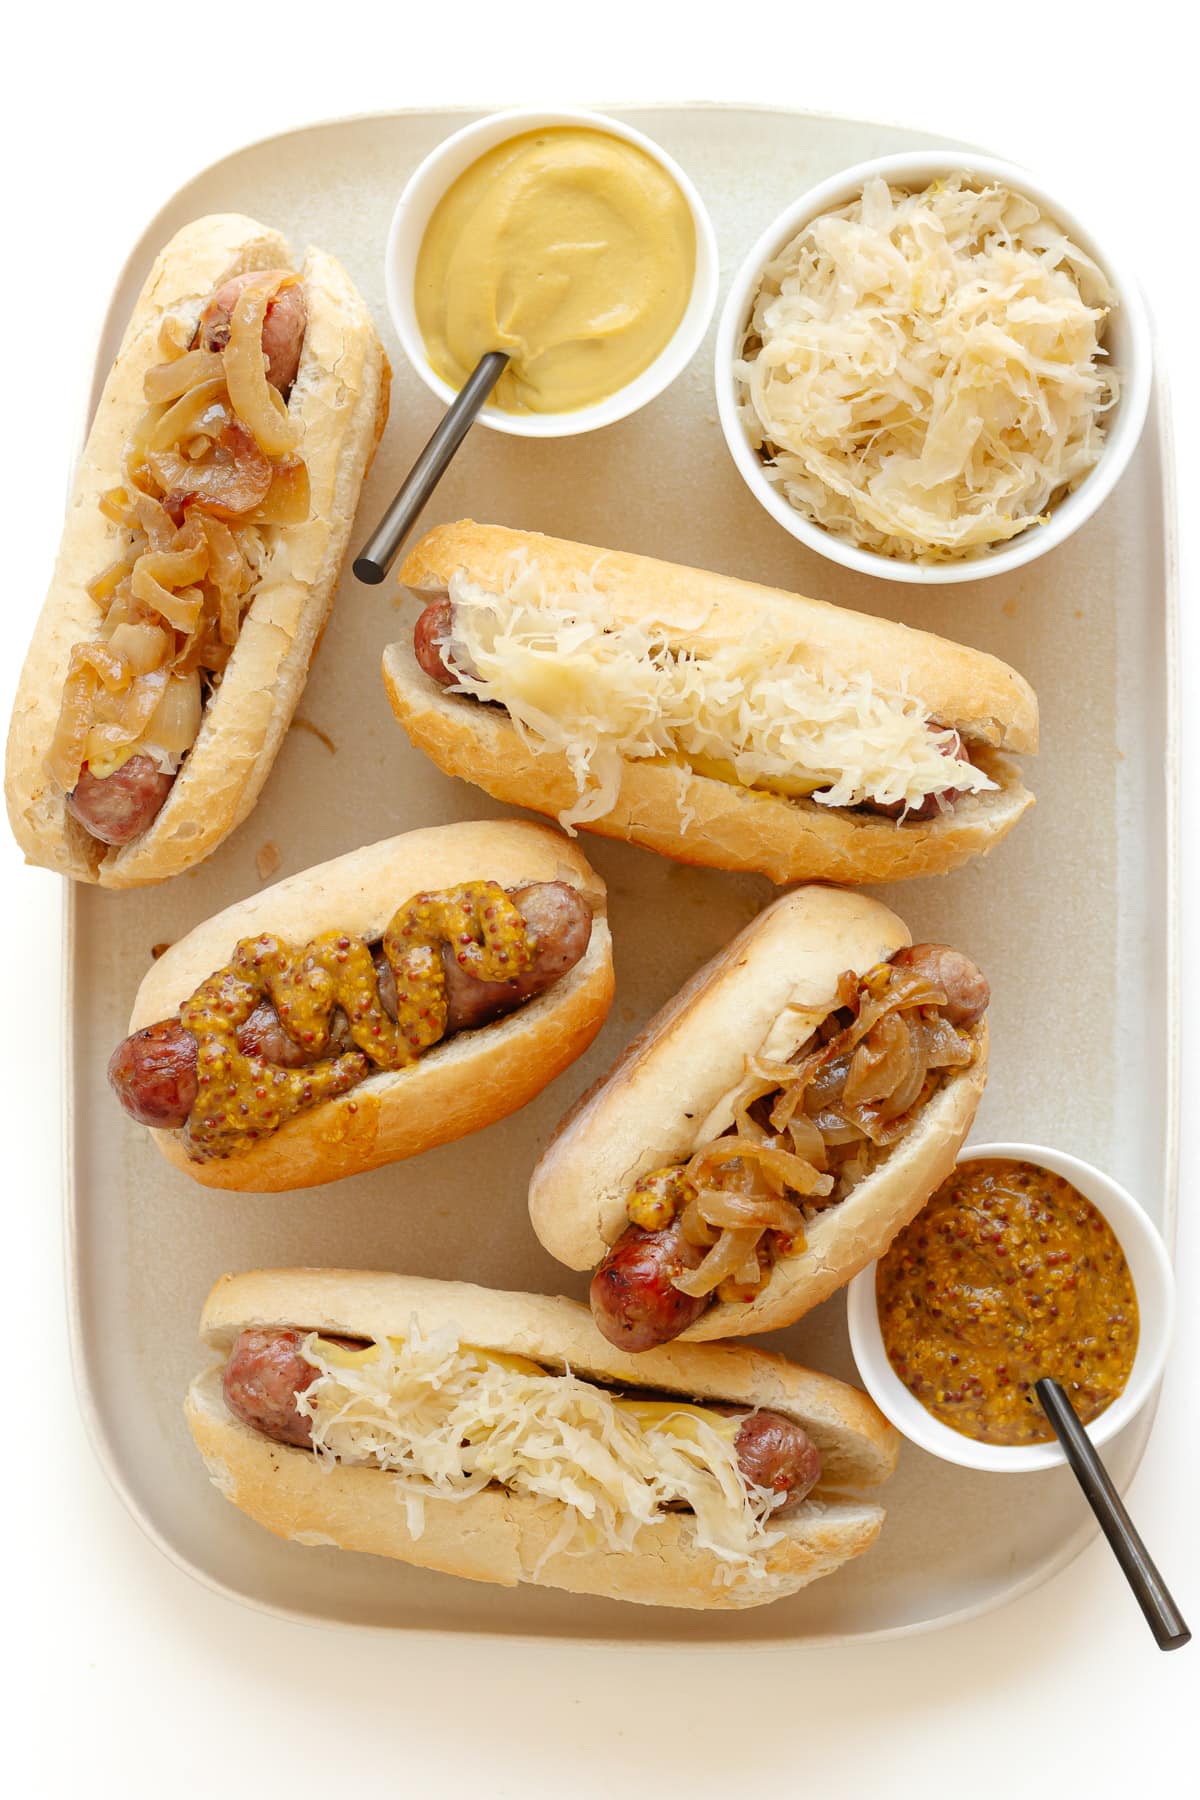 Platter of bratwurst in buns with various toppings.